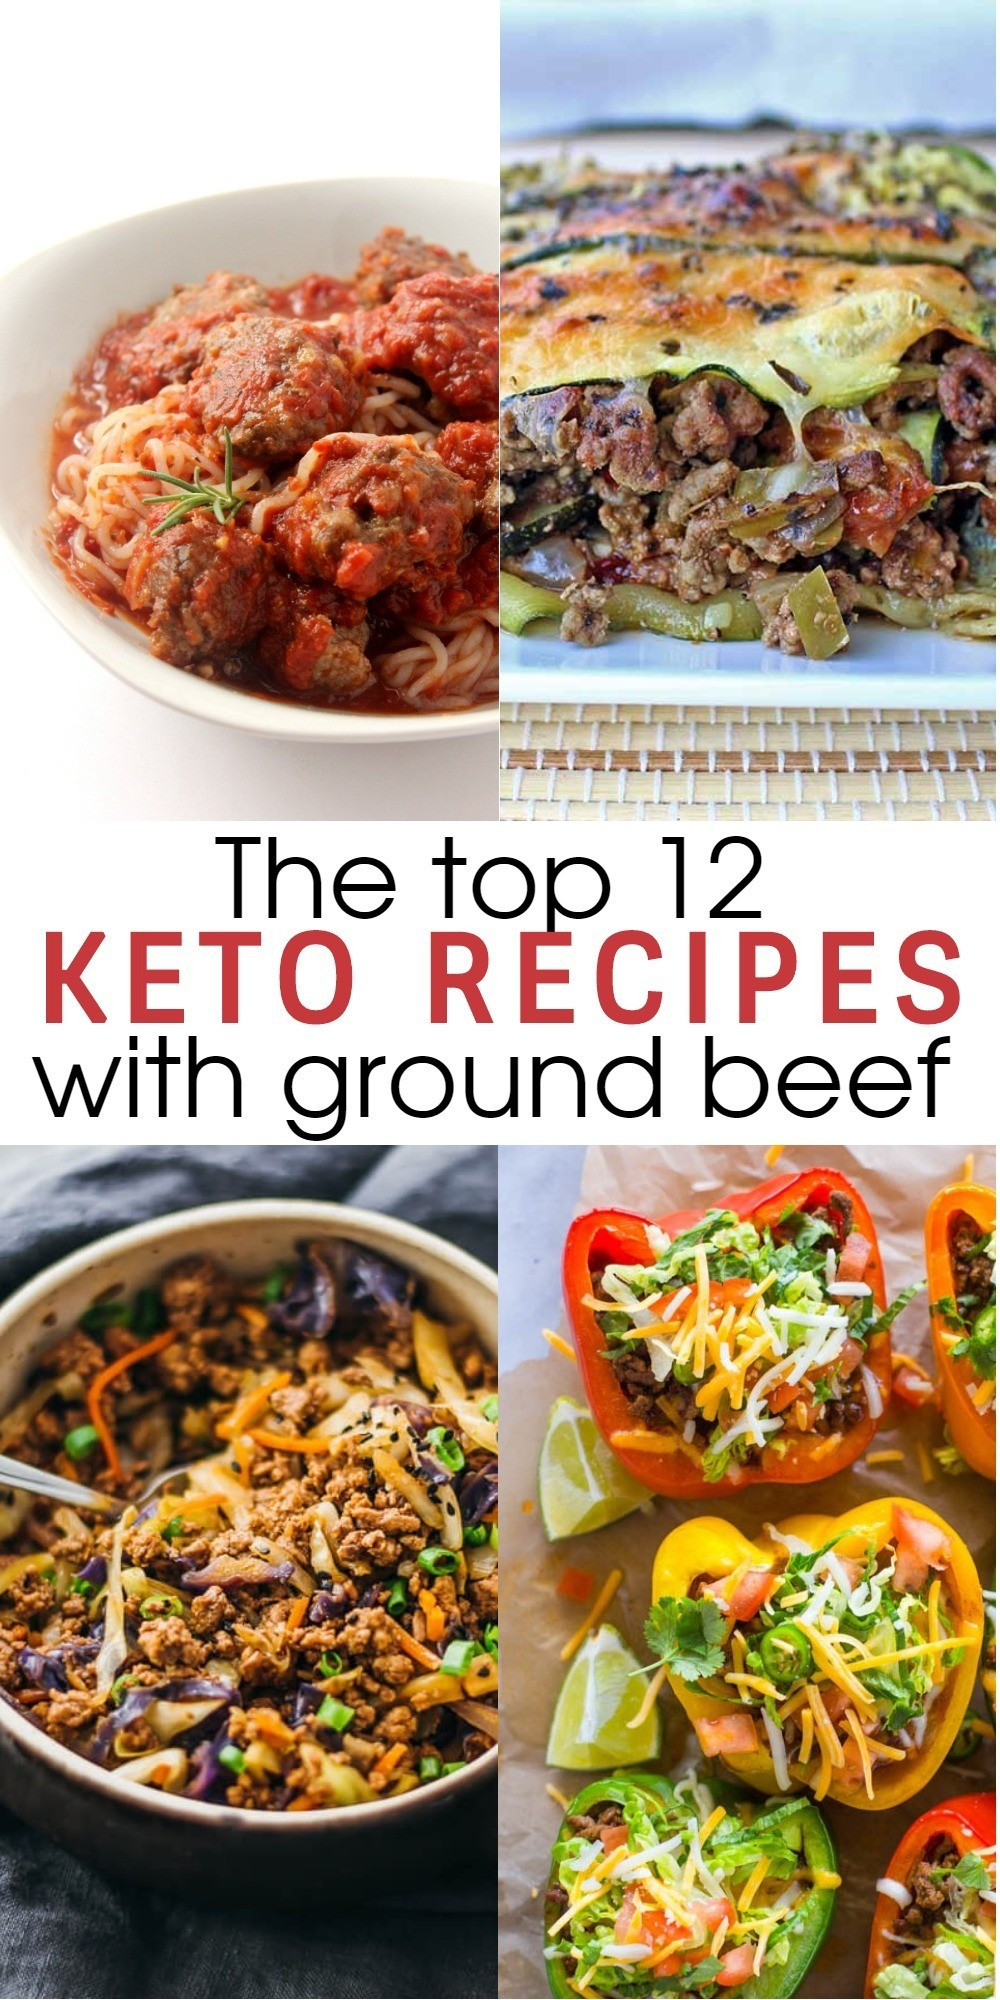 Keto Dinner Recipes Beef Low Carb
 12 Flavorful and Easy Keto Recipes With Ground Beef To Try